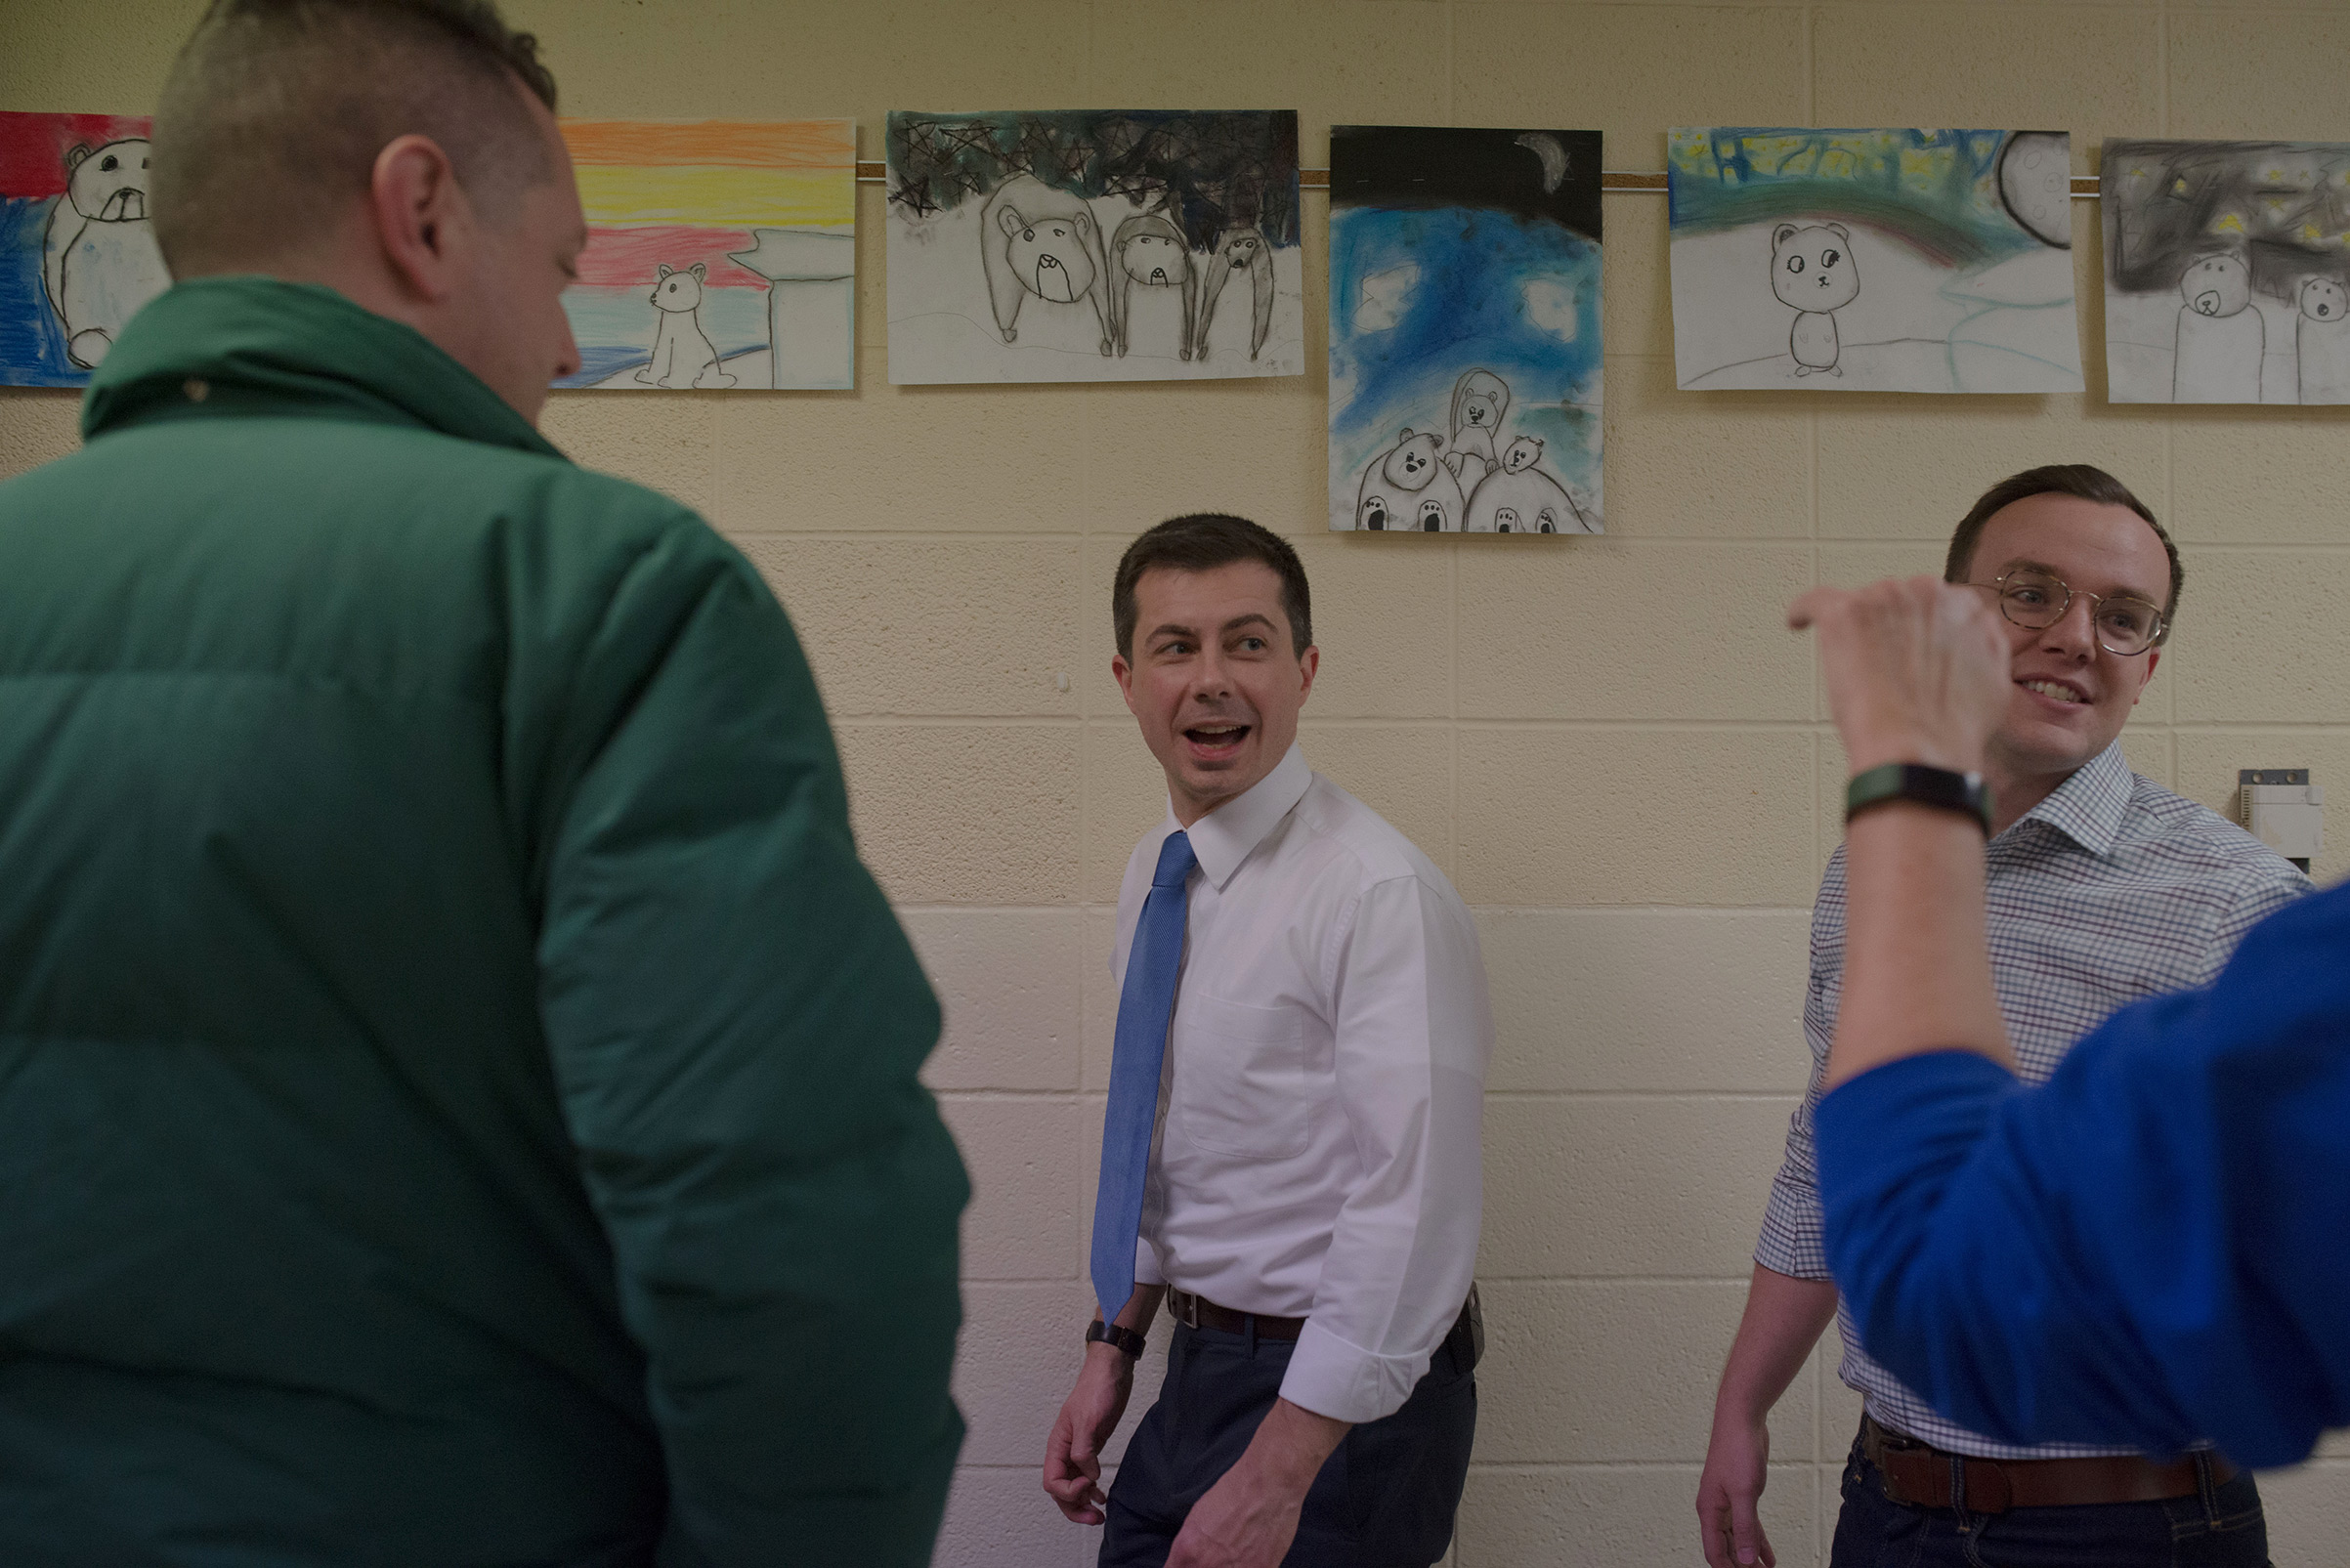 Democratic presidential candidate and South Bend, Ind., Mayor Pete Buttigieg arrives at a campaign event with his and husband Chasten Glezman (R) at Town Hall in Vinton, IA on Jan. 27, 2020. (September Dawn Bottoms for TIME)